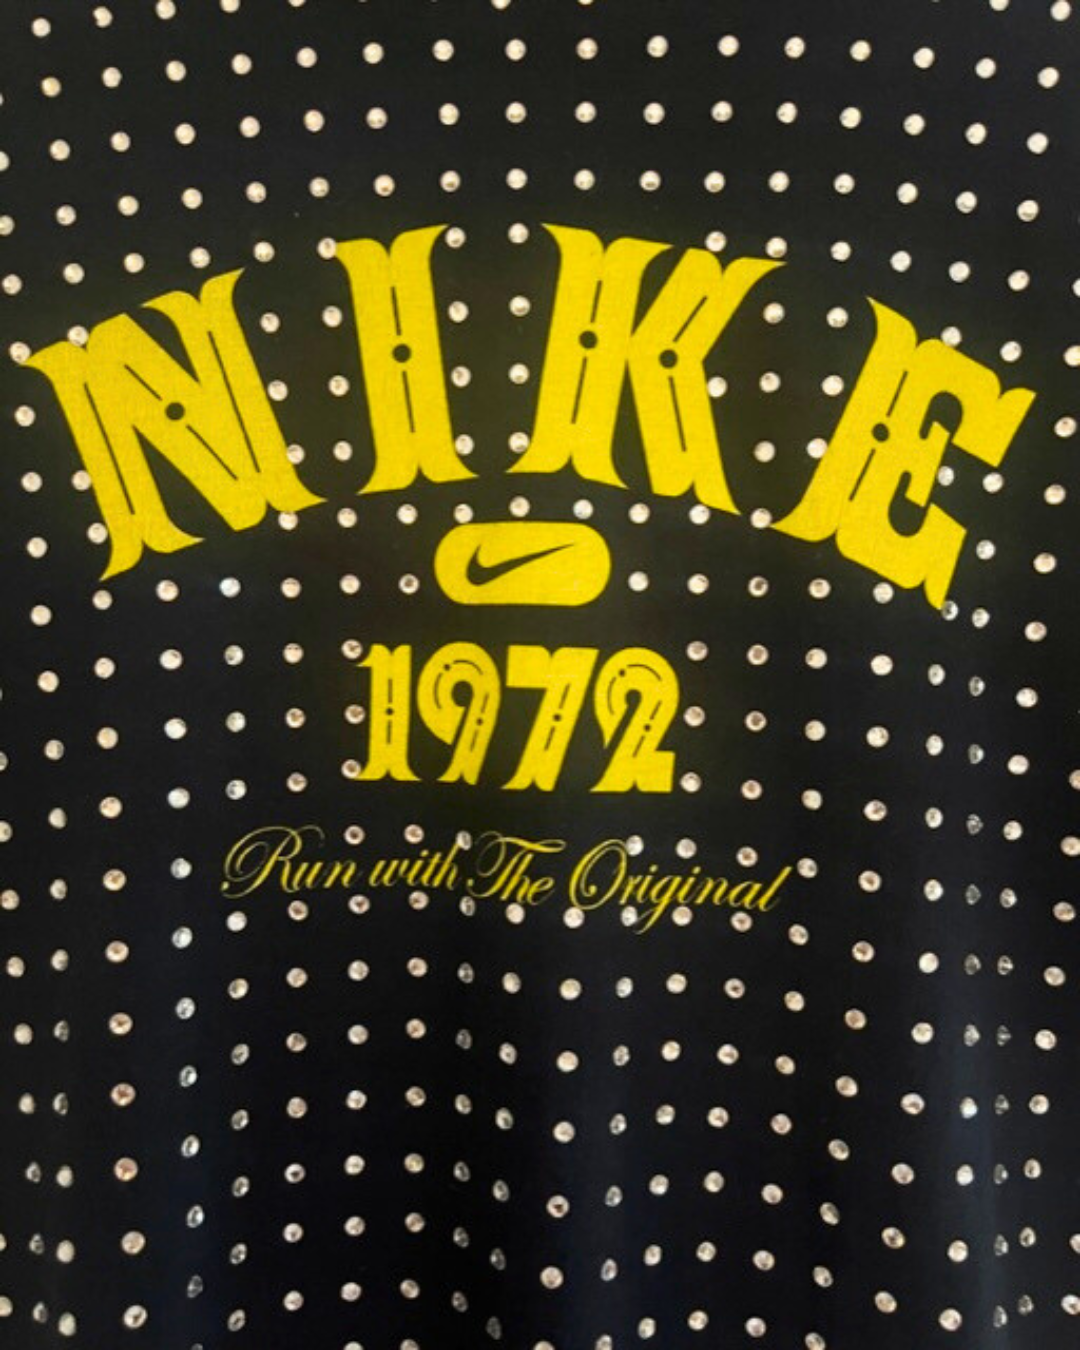 Vintage Black NIKE T-shirt with all over diamante studs